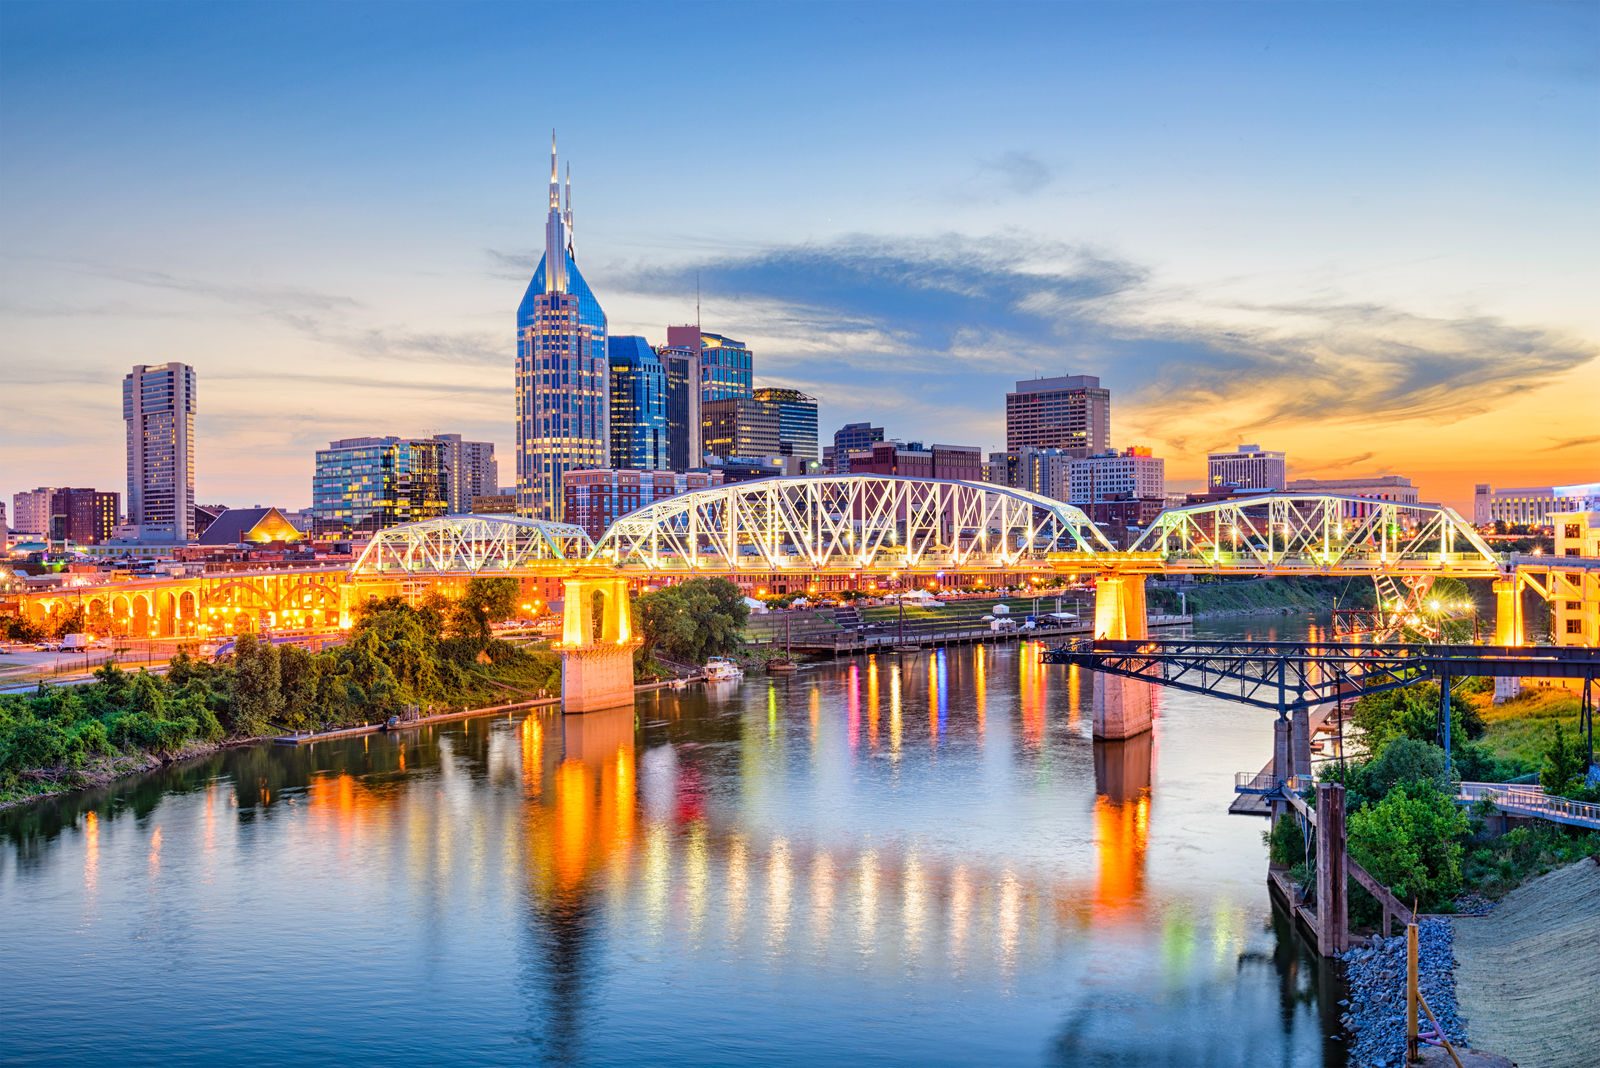 Fares to Nashville, Tennessee, from Reagan National and BWI-Marshall start at $99 for a one-way ticket. (Thinkstock)